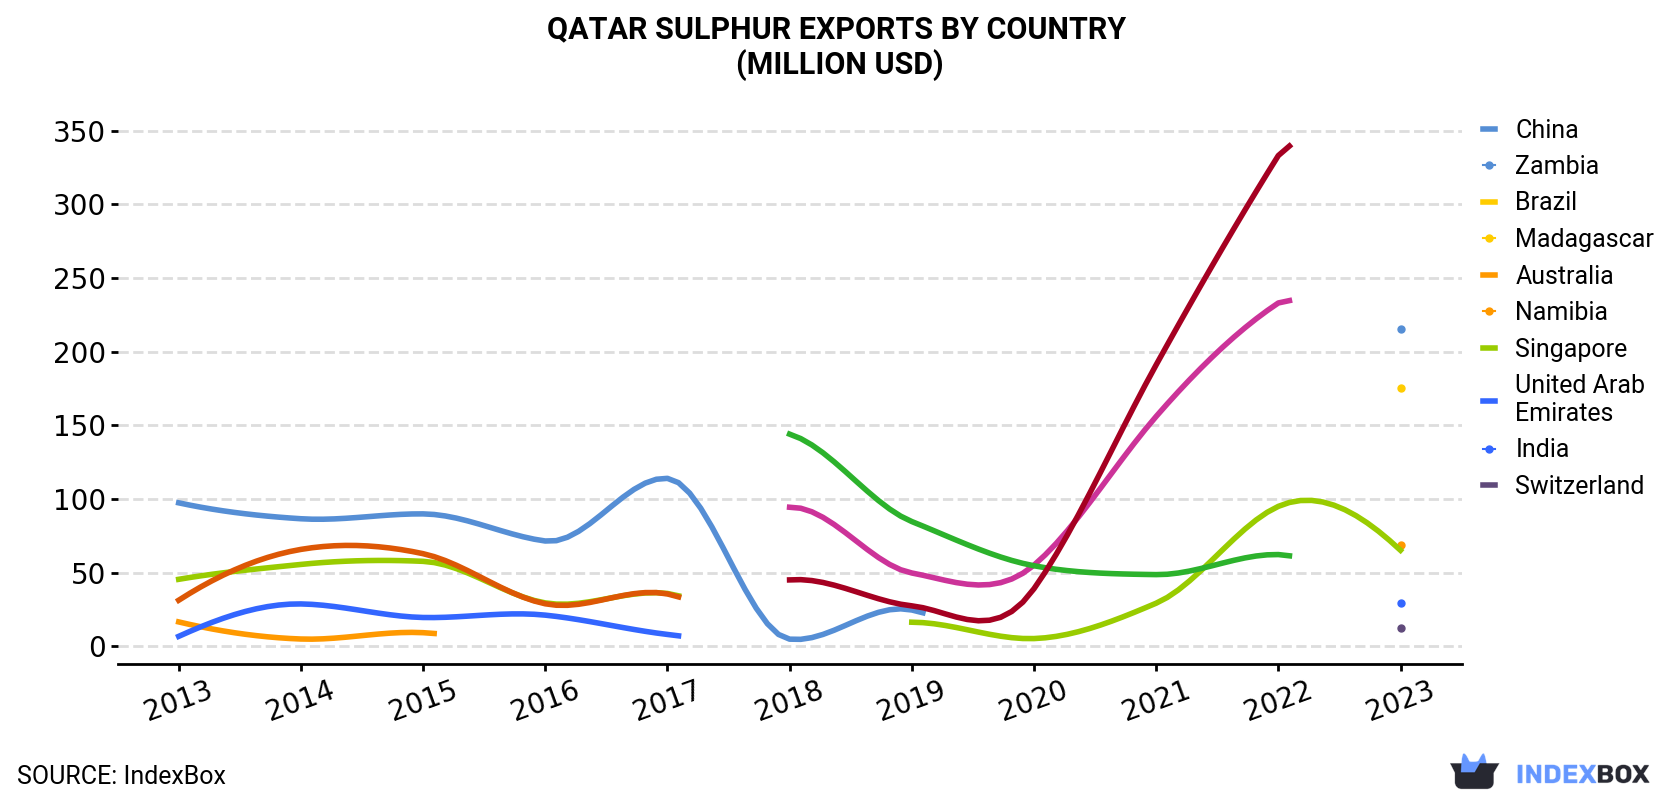 Qatar Sulphur Exports By Country (Million USD)